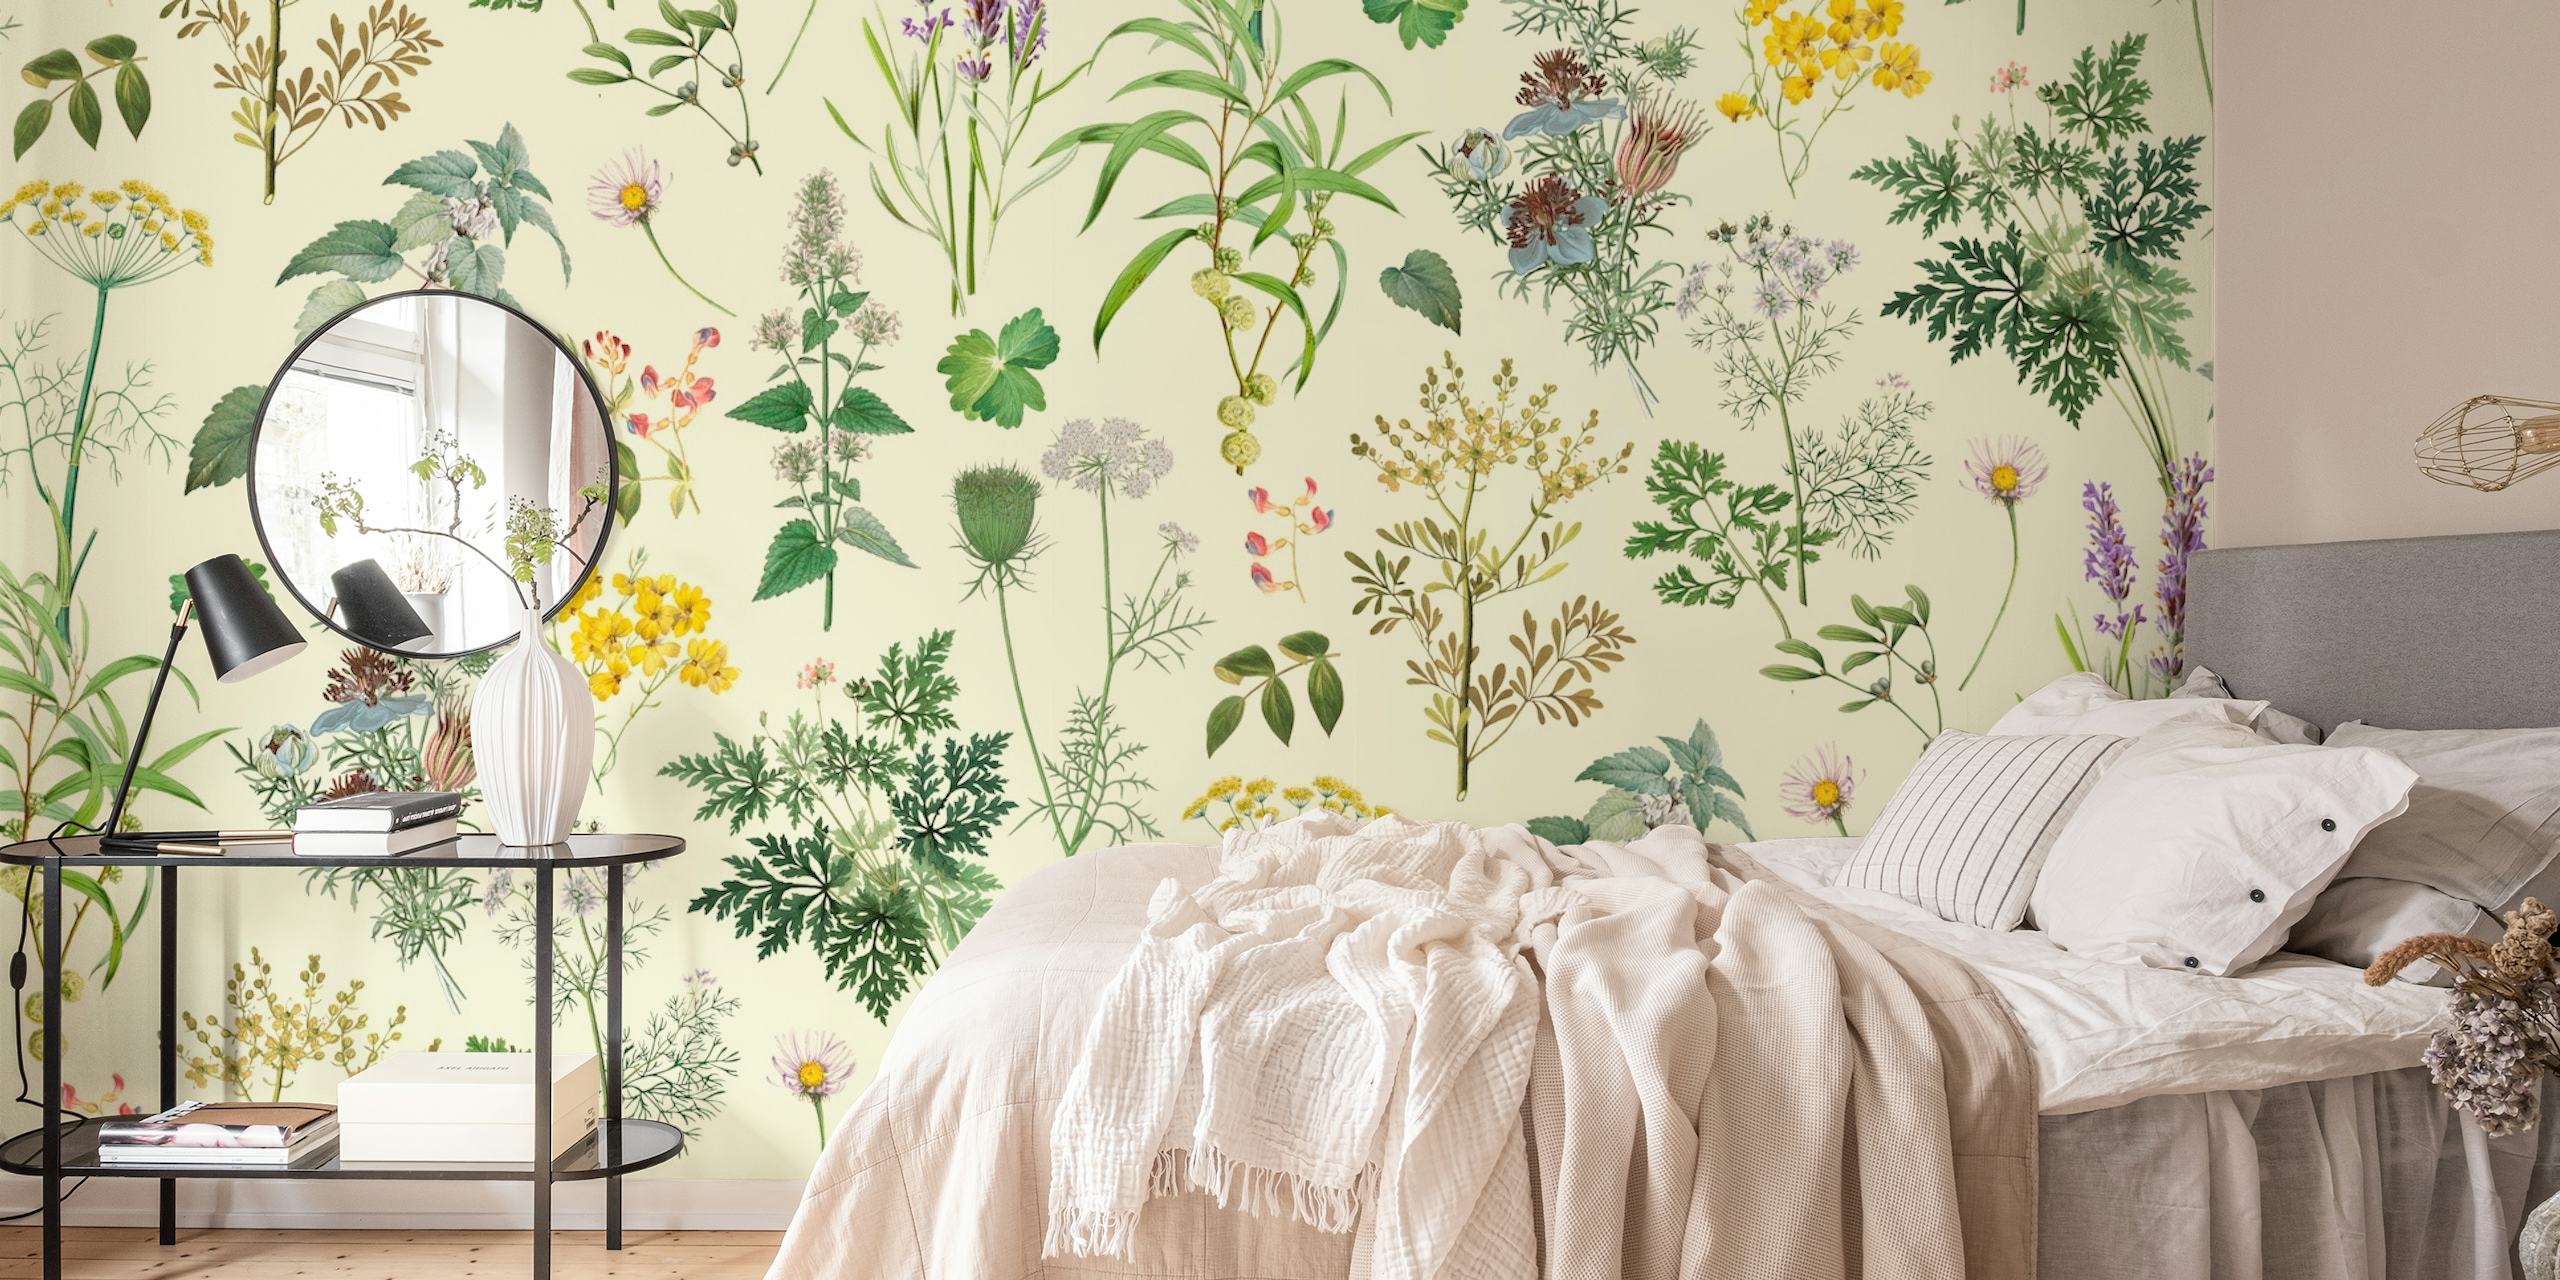 Herbs and Wildflower II wall mural with diverse wildflowers in soft colors